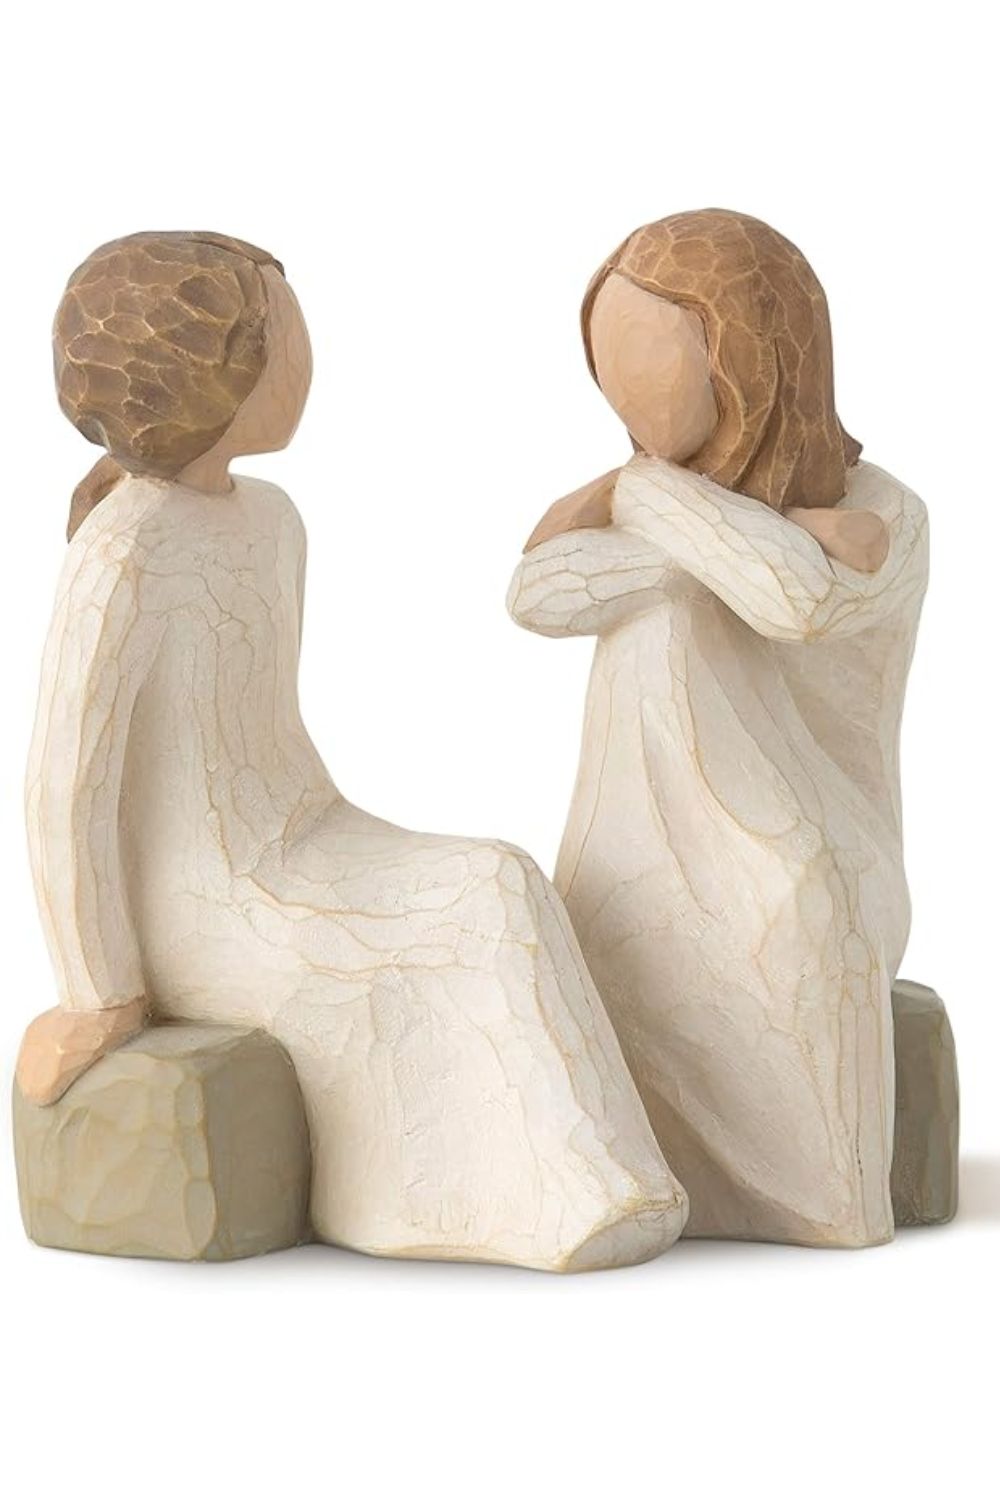 willow-tree-figurine-heart-and-soul